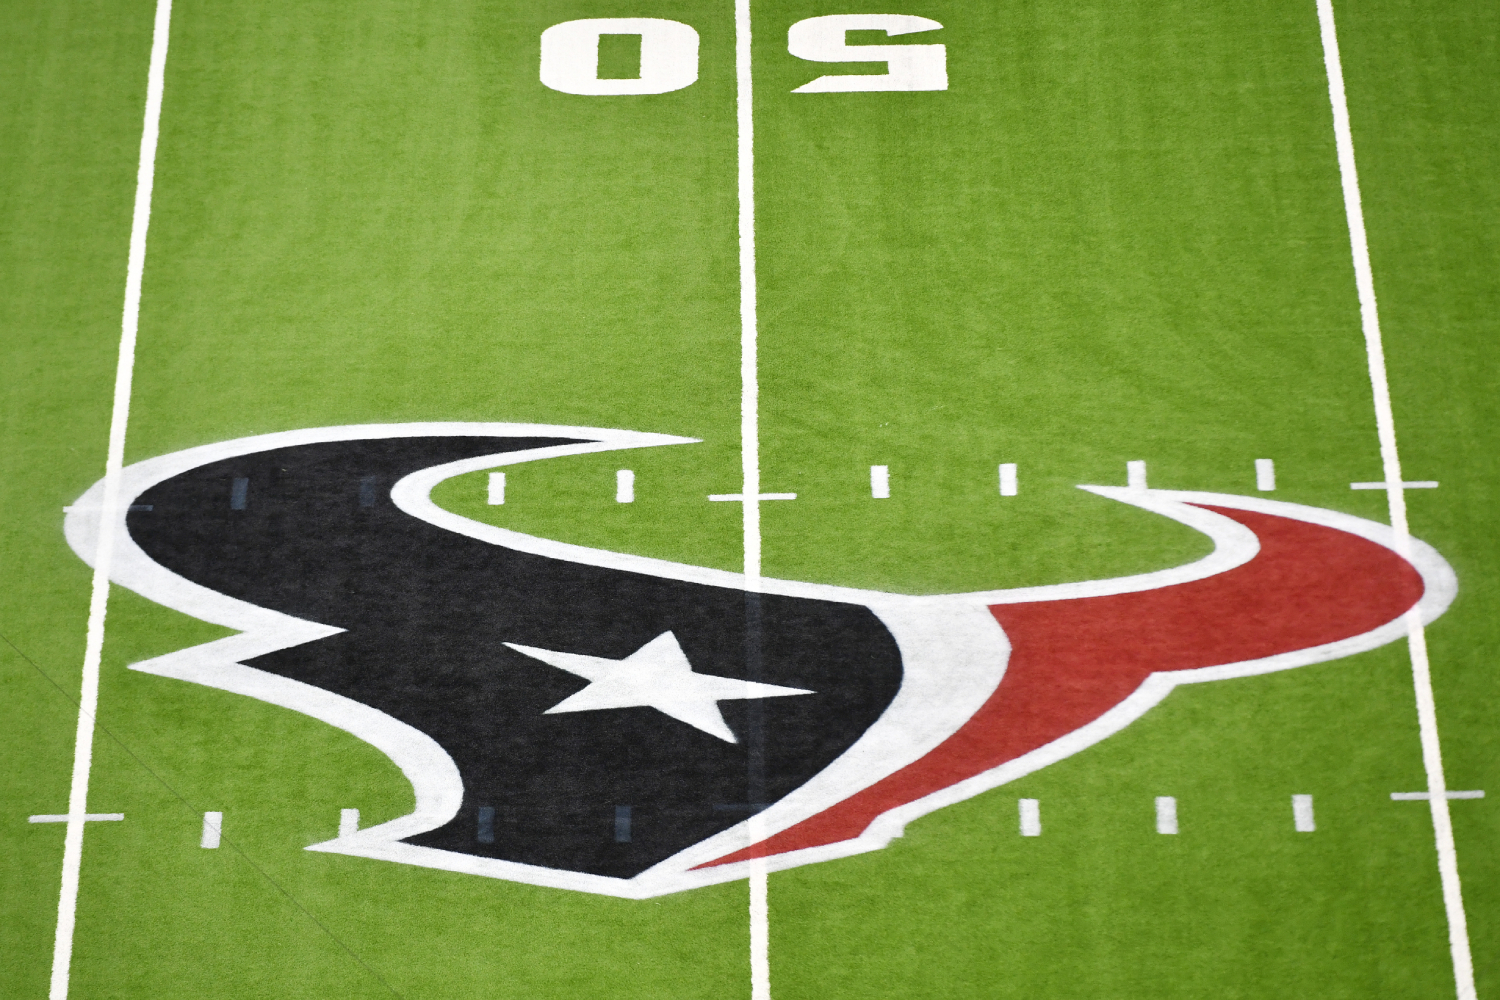 The Houston Texans made yet another baffling move.